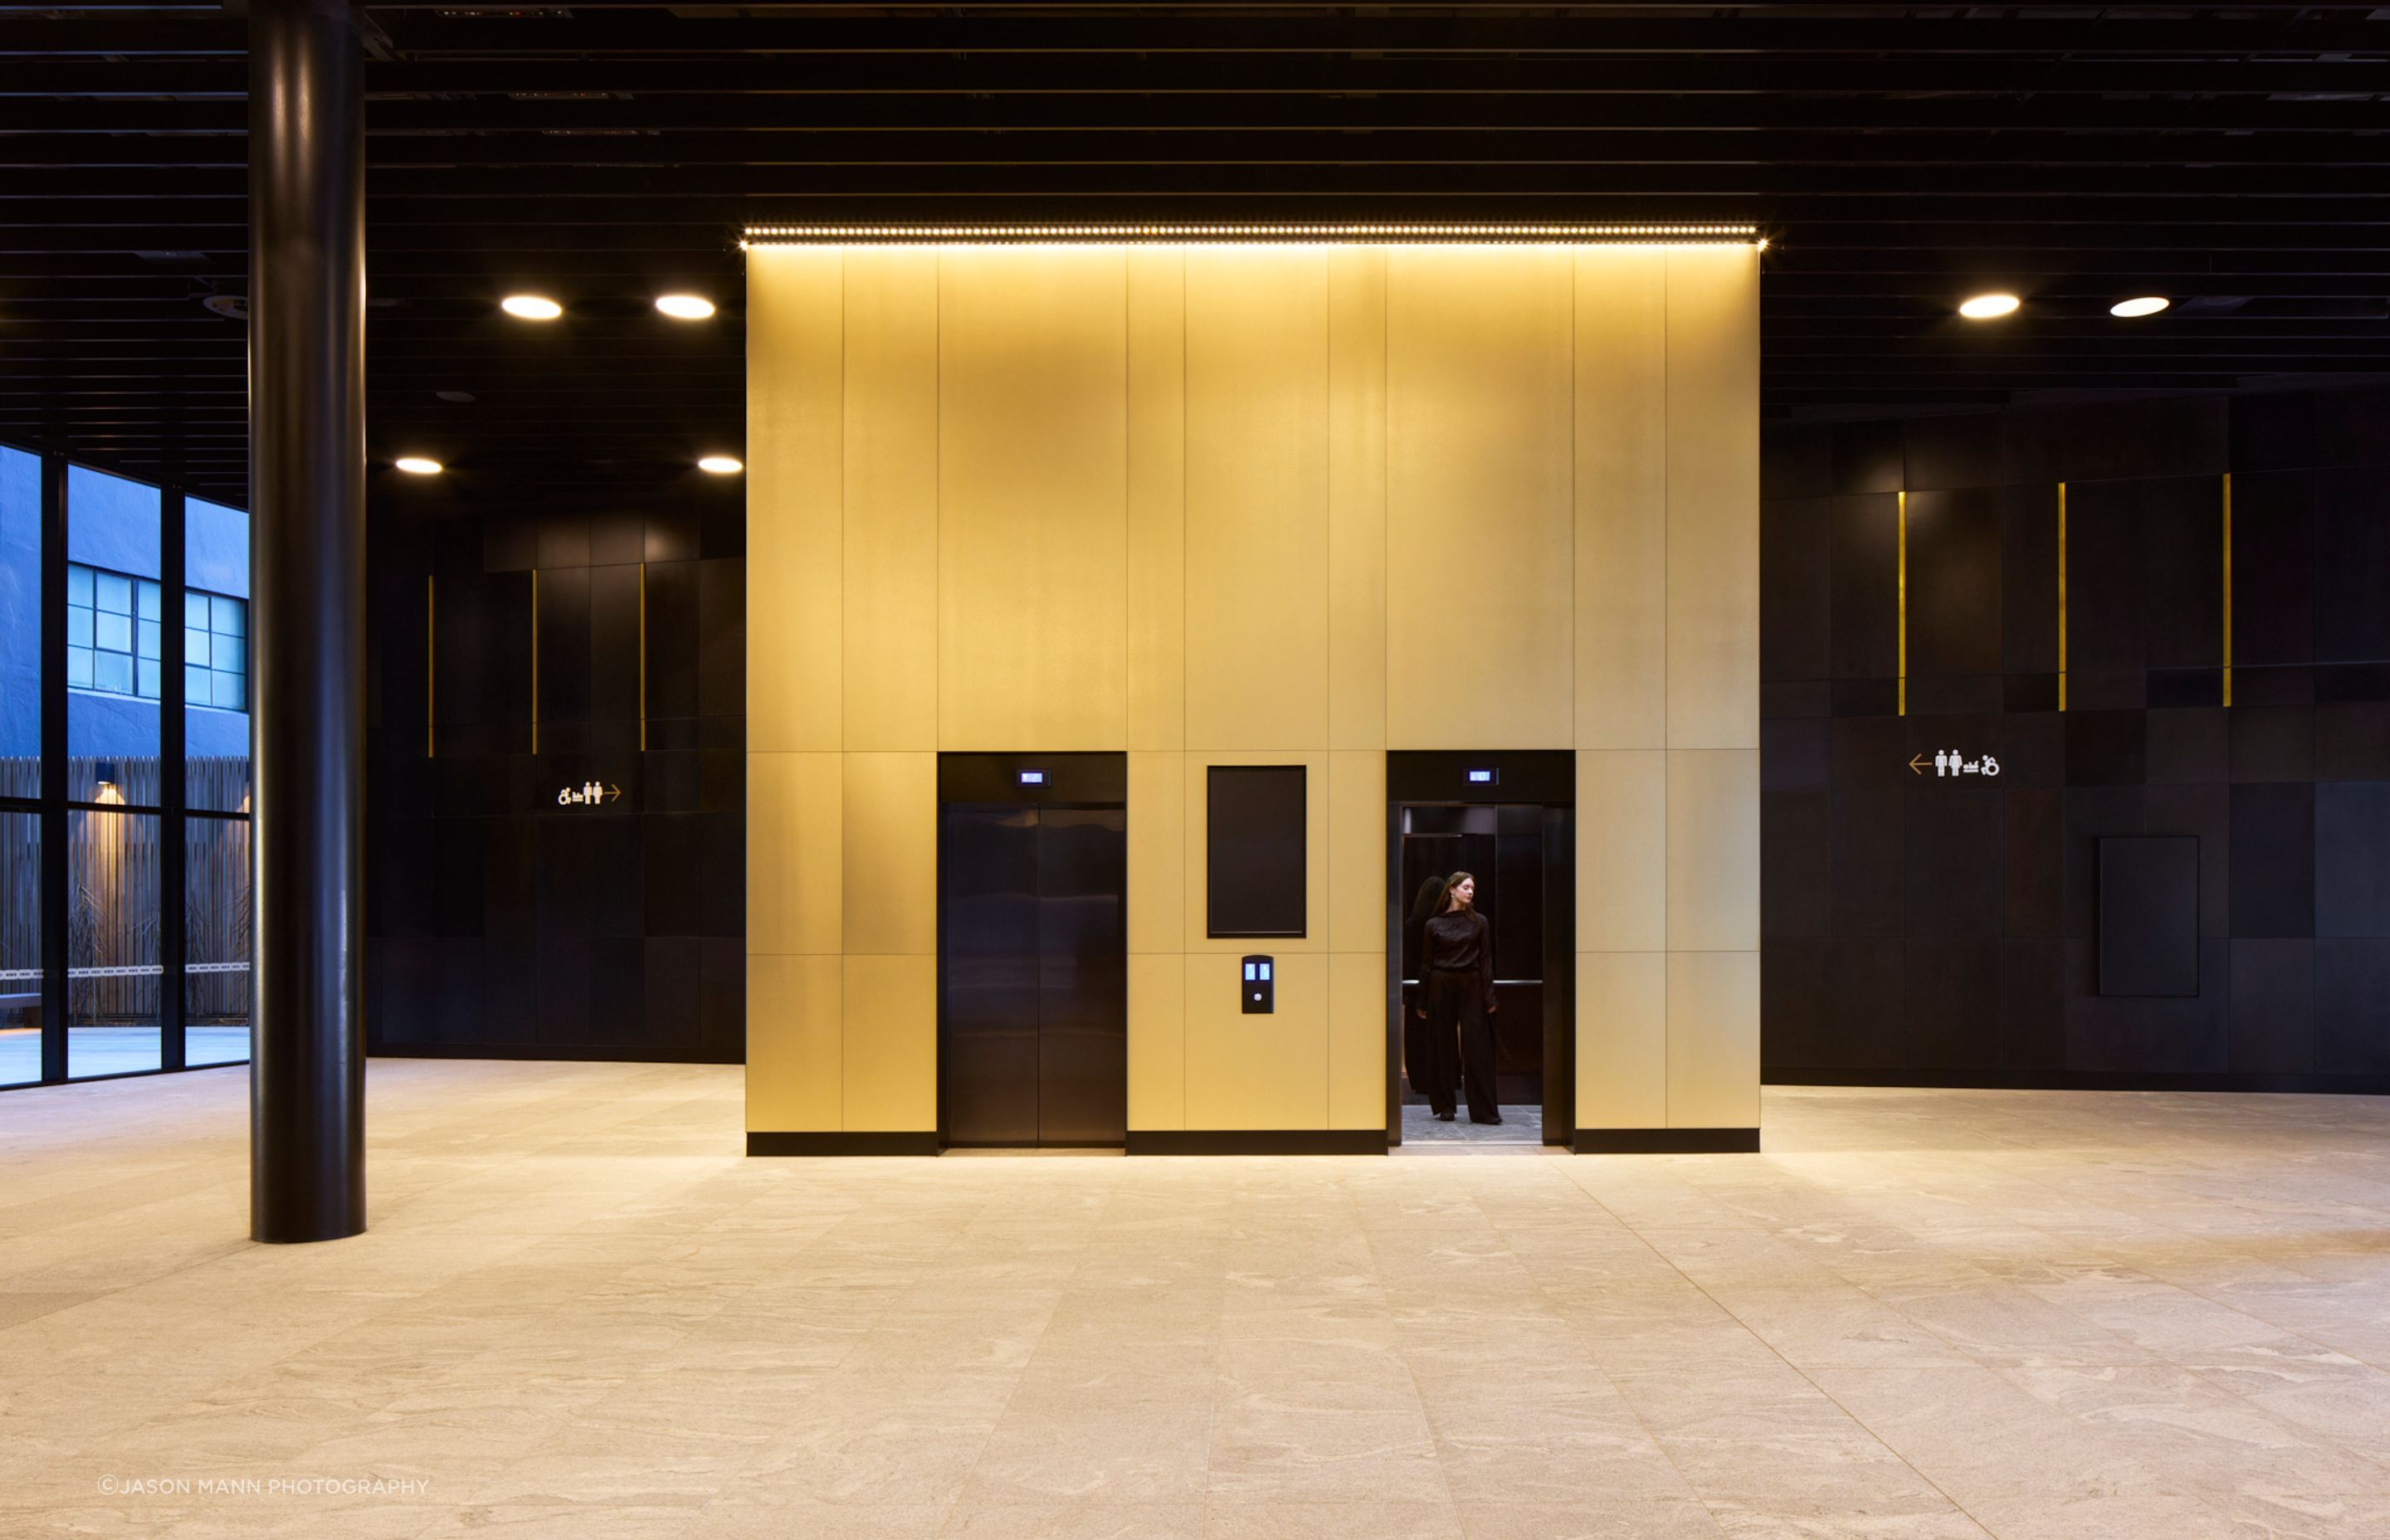 The building's public elevators, beautifully contrasted with the dark hardboard walls.